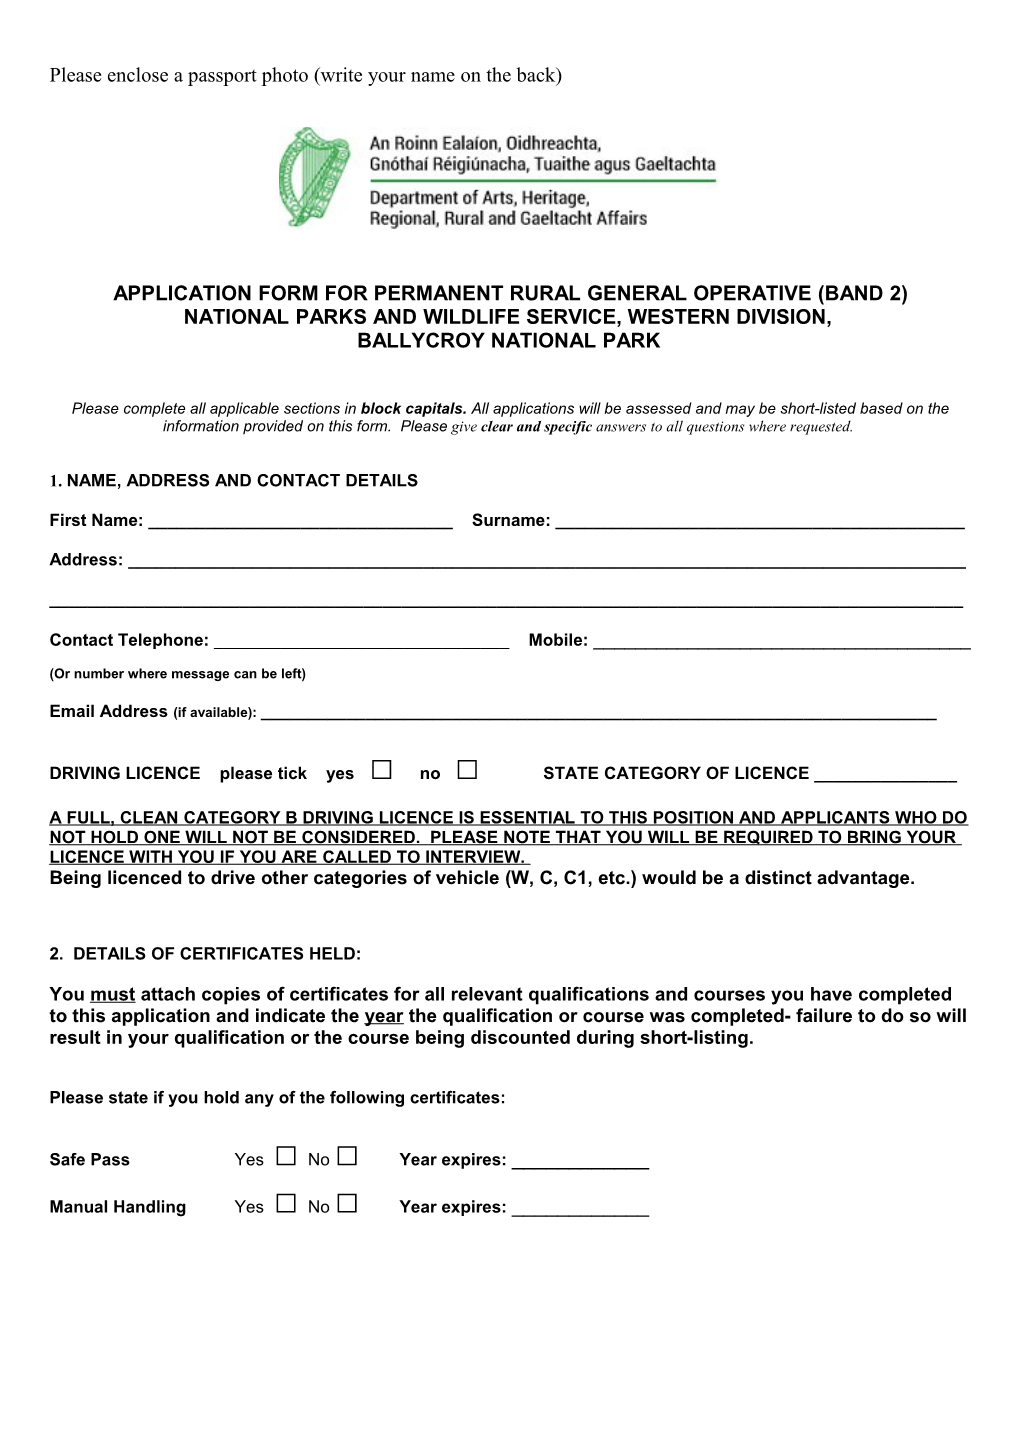 Application Form for Permanent Rural General Operative(Band 2)